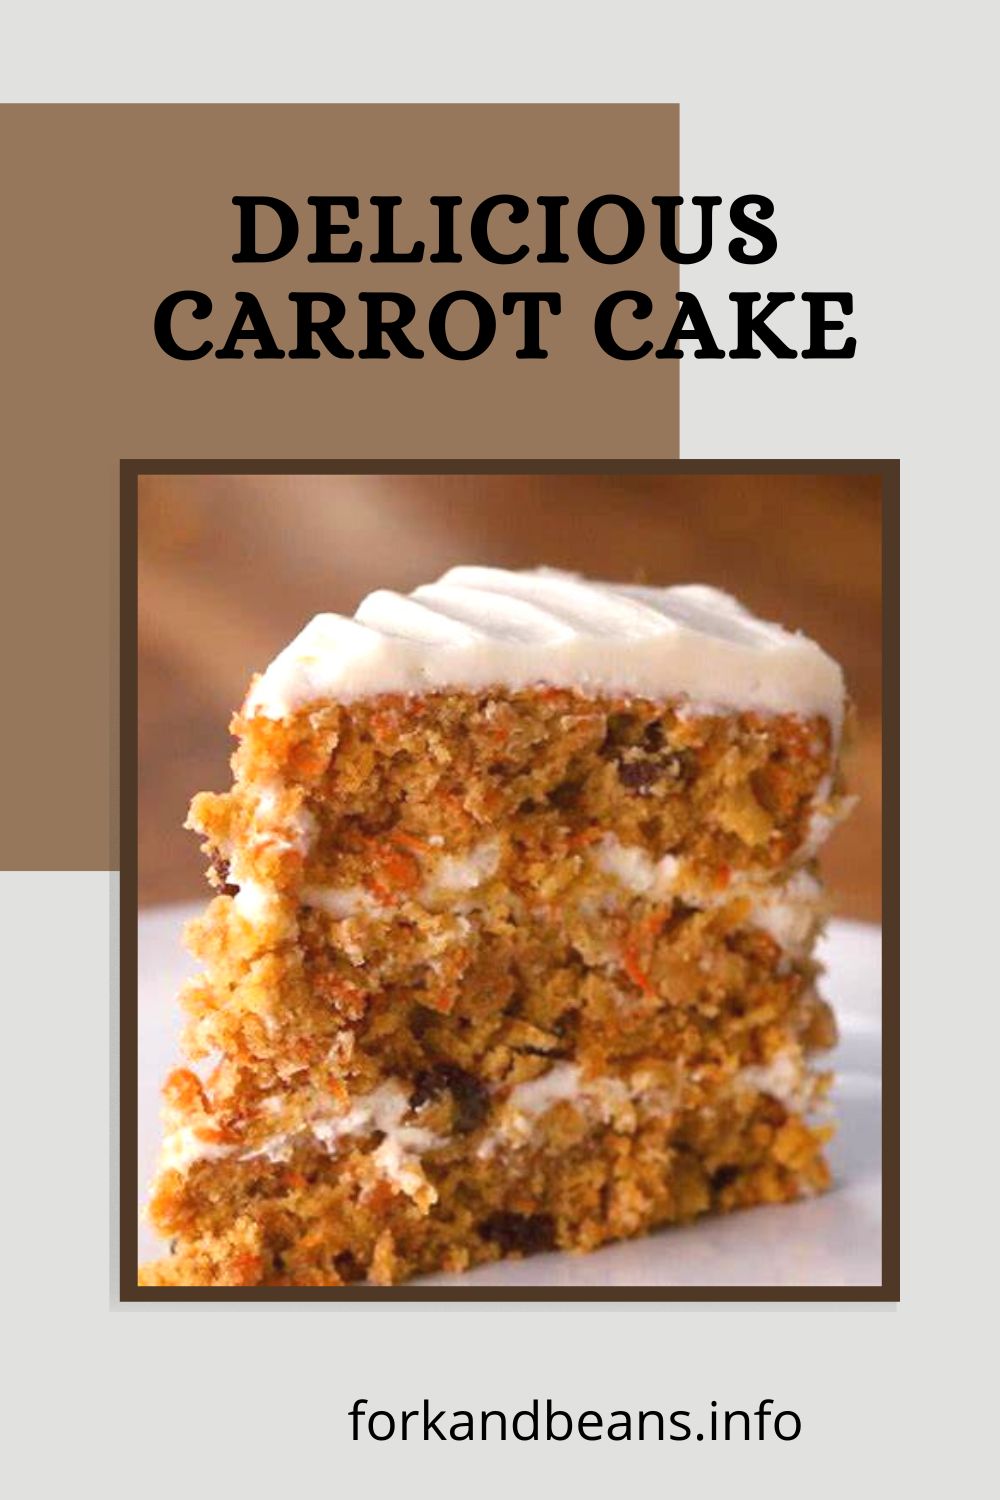 YUMMY CARROT CAKE... The Best!